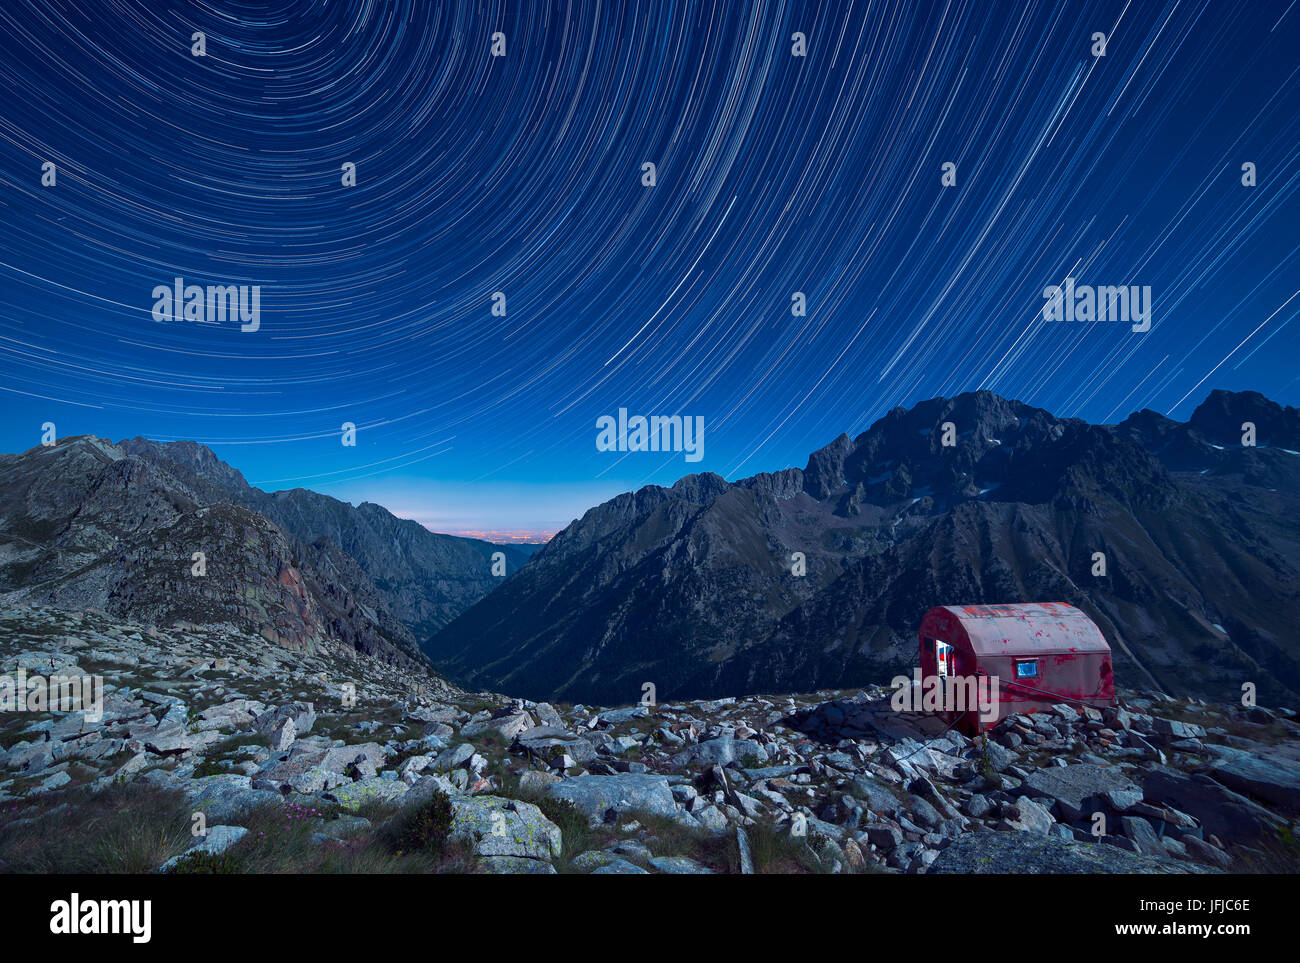 Italy, Piedmont, Cuneo District, Gesso Valley, Alpi Marittime Natural Park, Startrail over the bivouac Guiglia and Argentera Peak Stock Photo